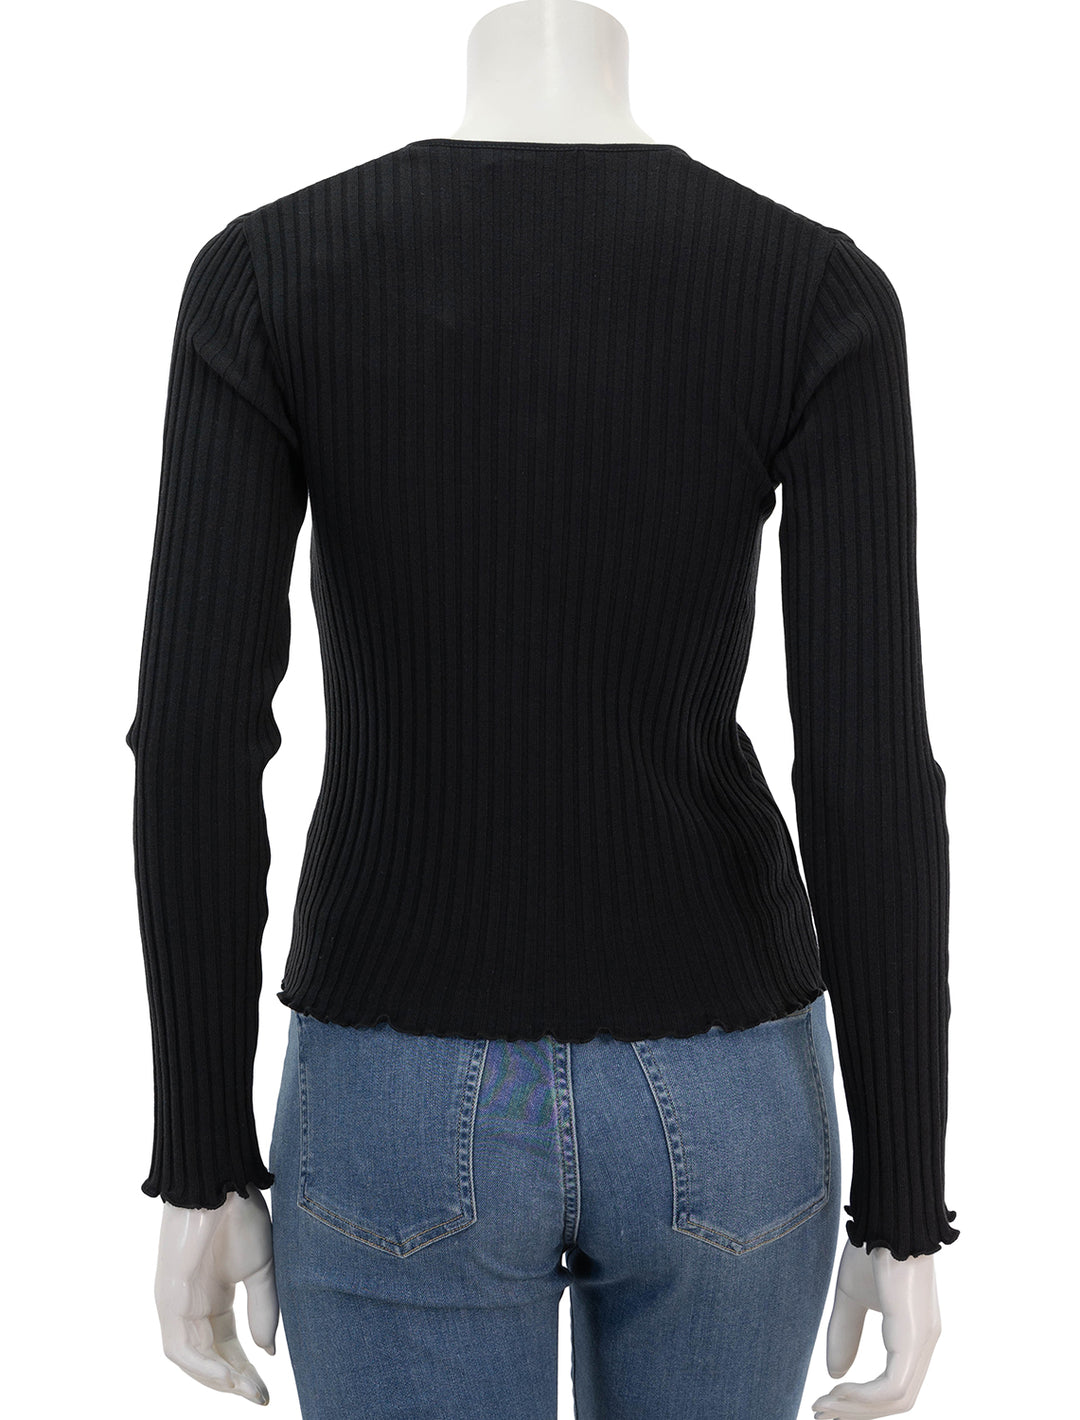 Back view of Vince's ribbed cardigan in black.